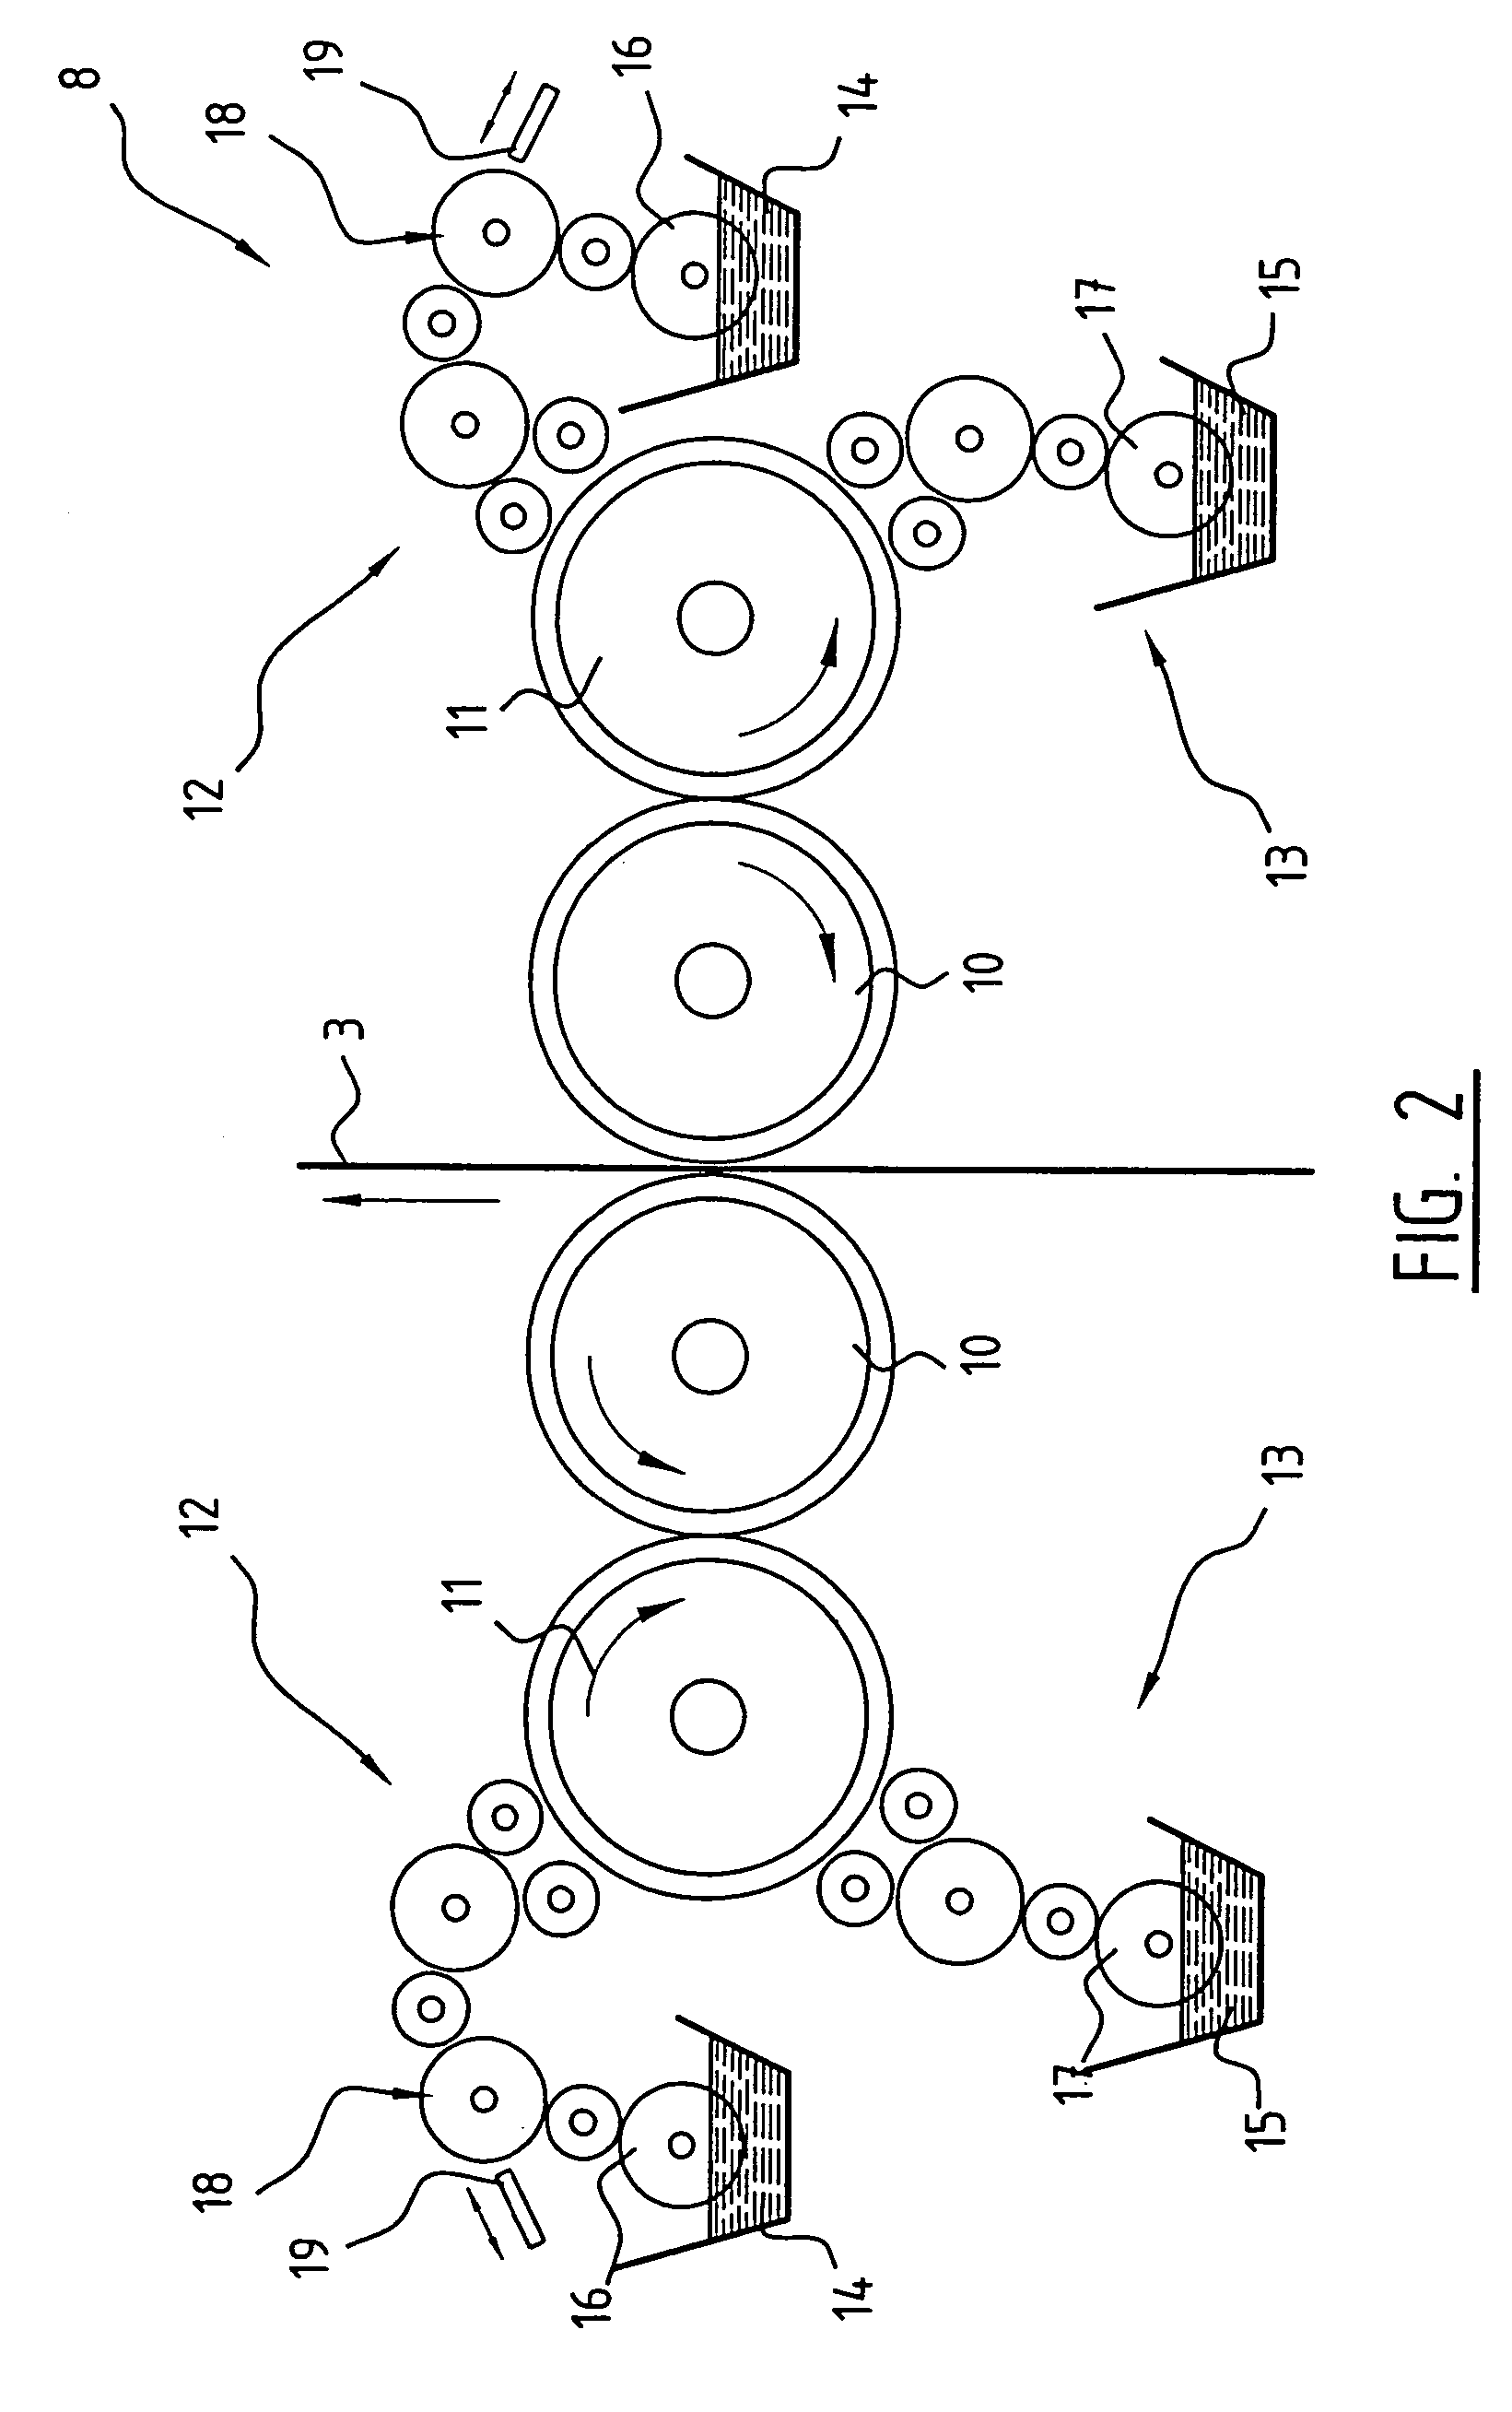 Method and system for monitoring printed material produced by a printing press